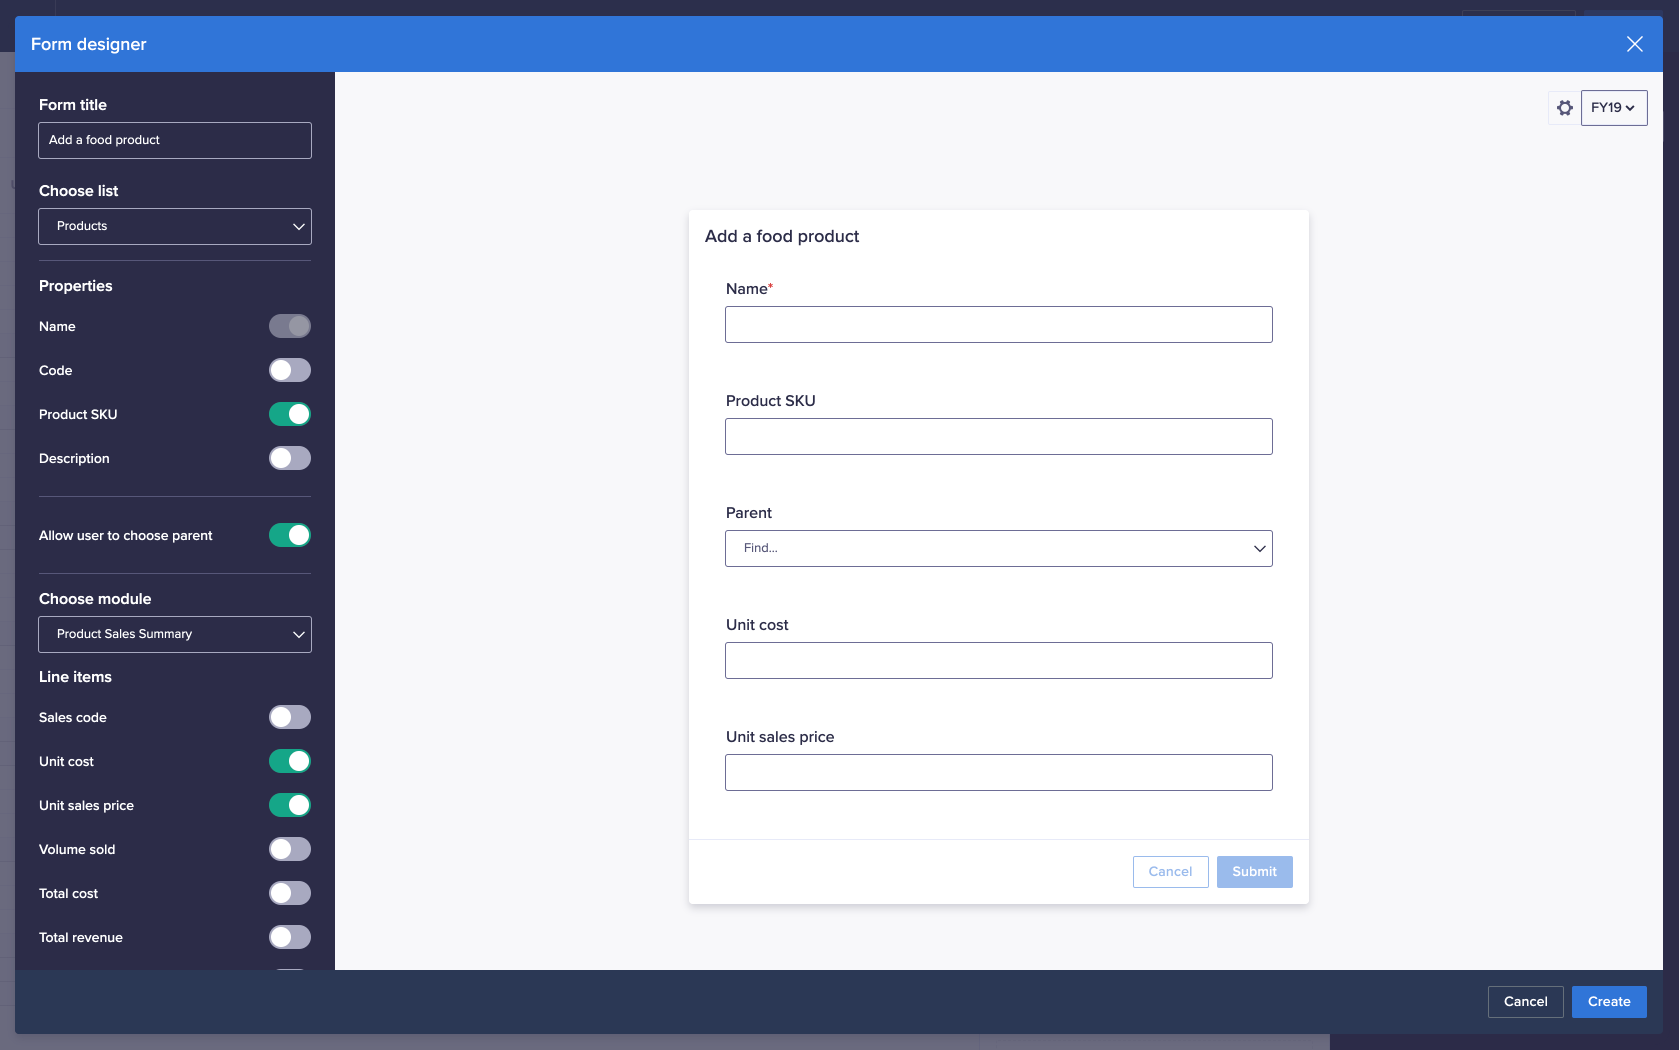 The Form designer dialog. The form being designed is named Add a food product and contains fields for the list item name, list properties, to select the parent of the list item, and to enter line item values.